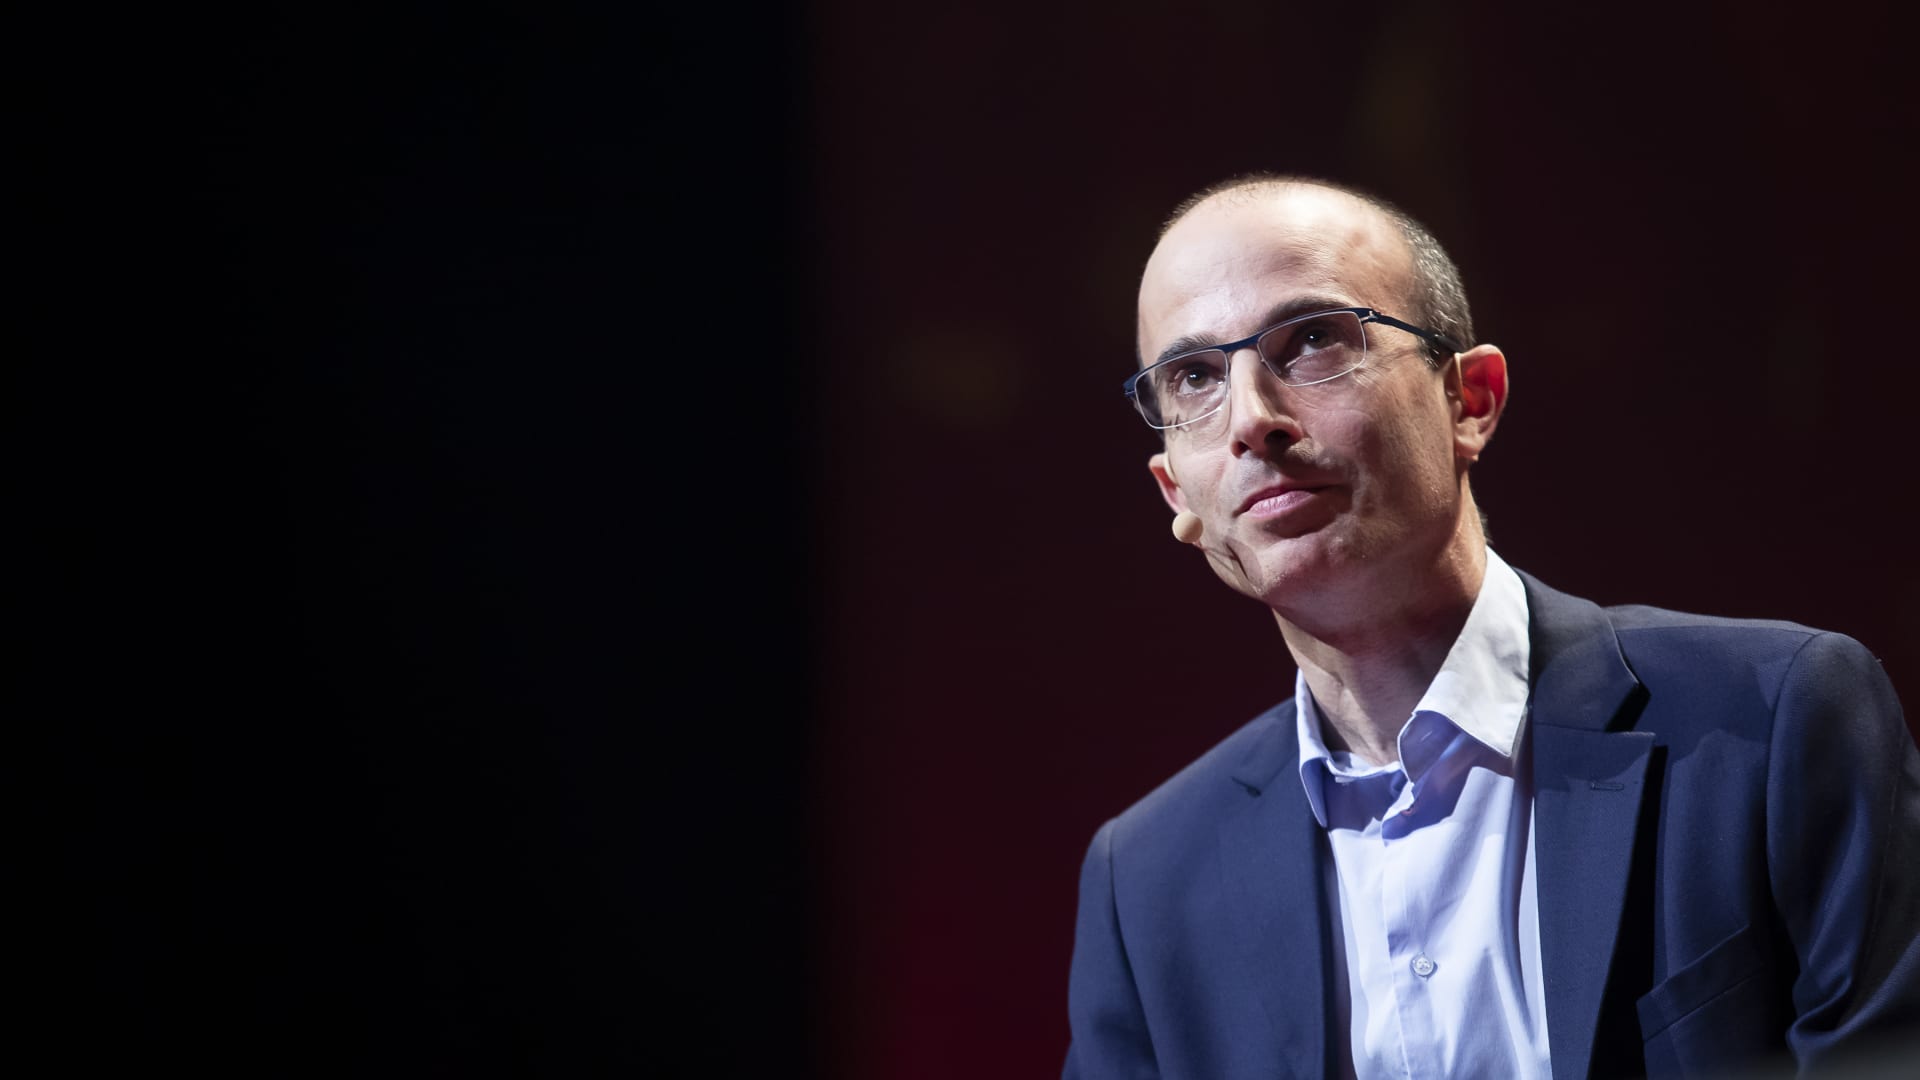 Israeli author, historian and professor Yuval Noah Harari has spoken out frequently against President Vladimir Putin's war in Ukraine, adding that it has had the unintended consequence of forging greater unity between Europe and the U.S.